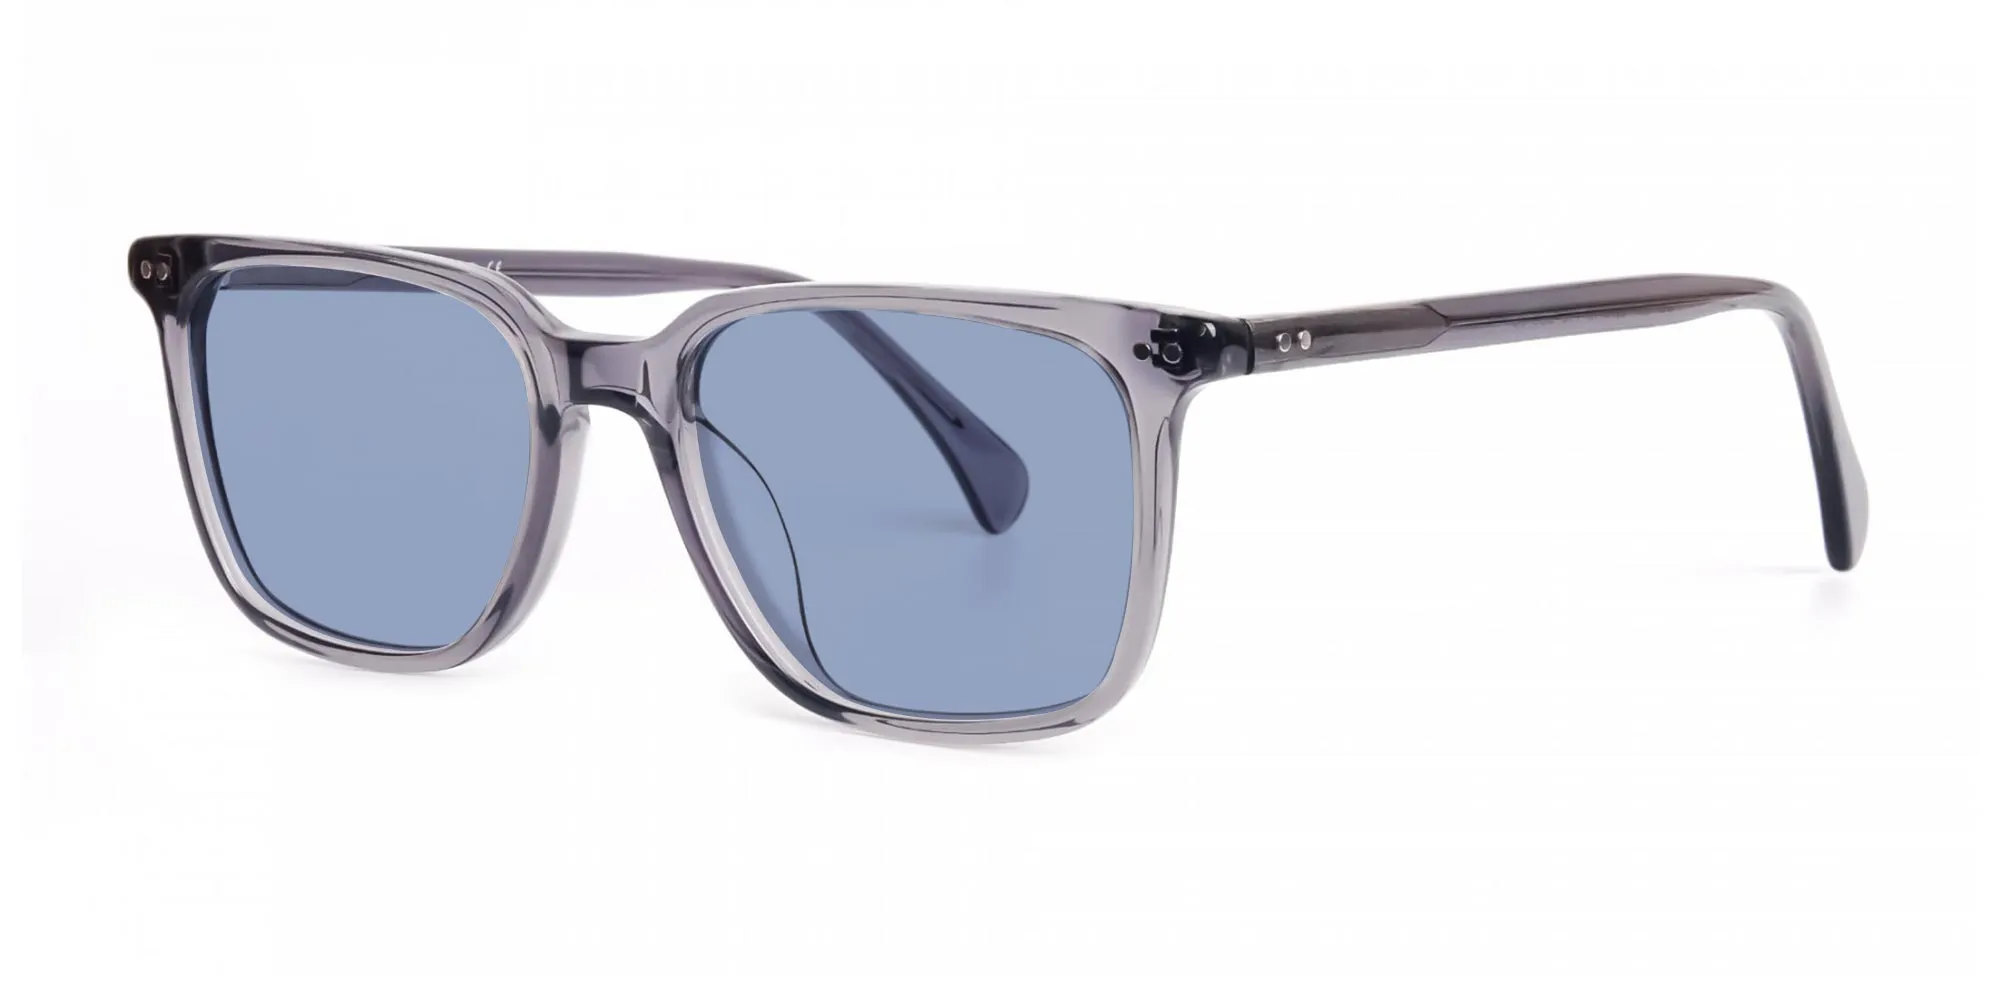 Grey Frame Glasses With Blue Tinted Lenses-2